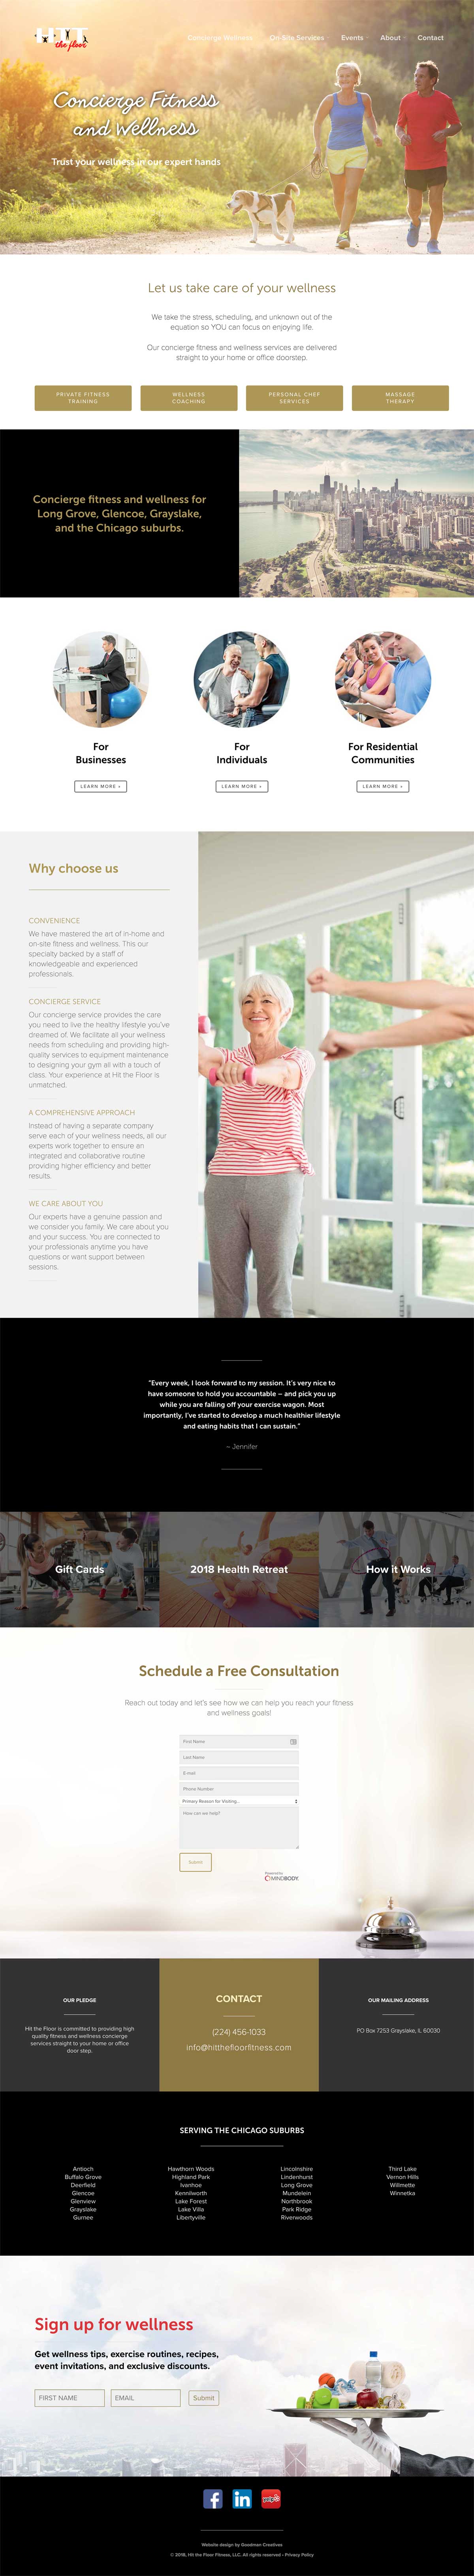 Website design for a concierge fitness company in the Chicago Suburbs